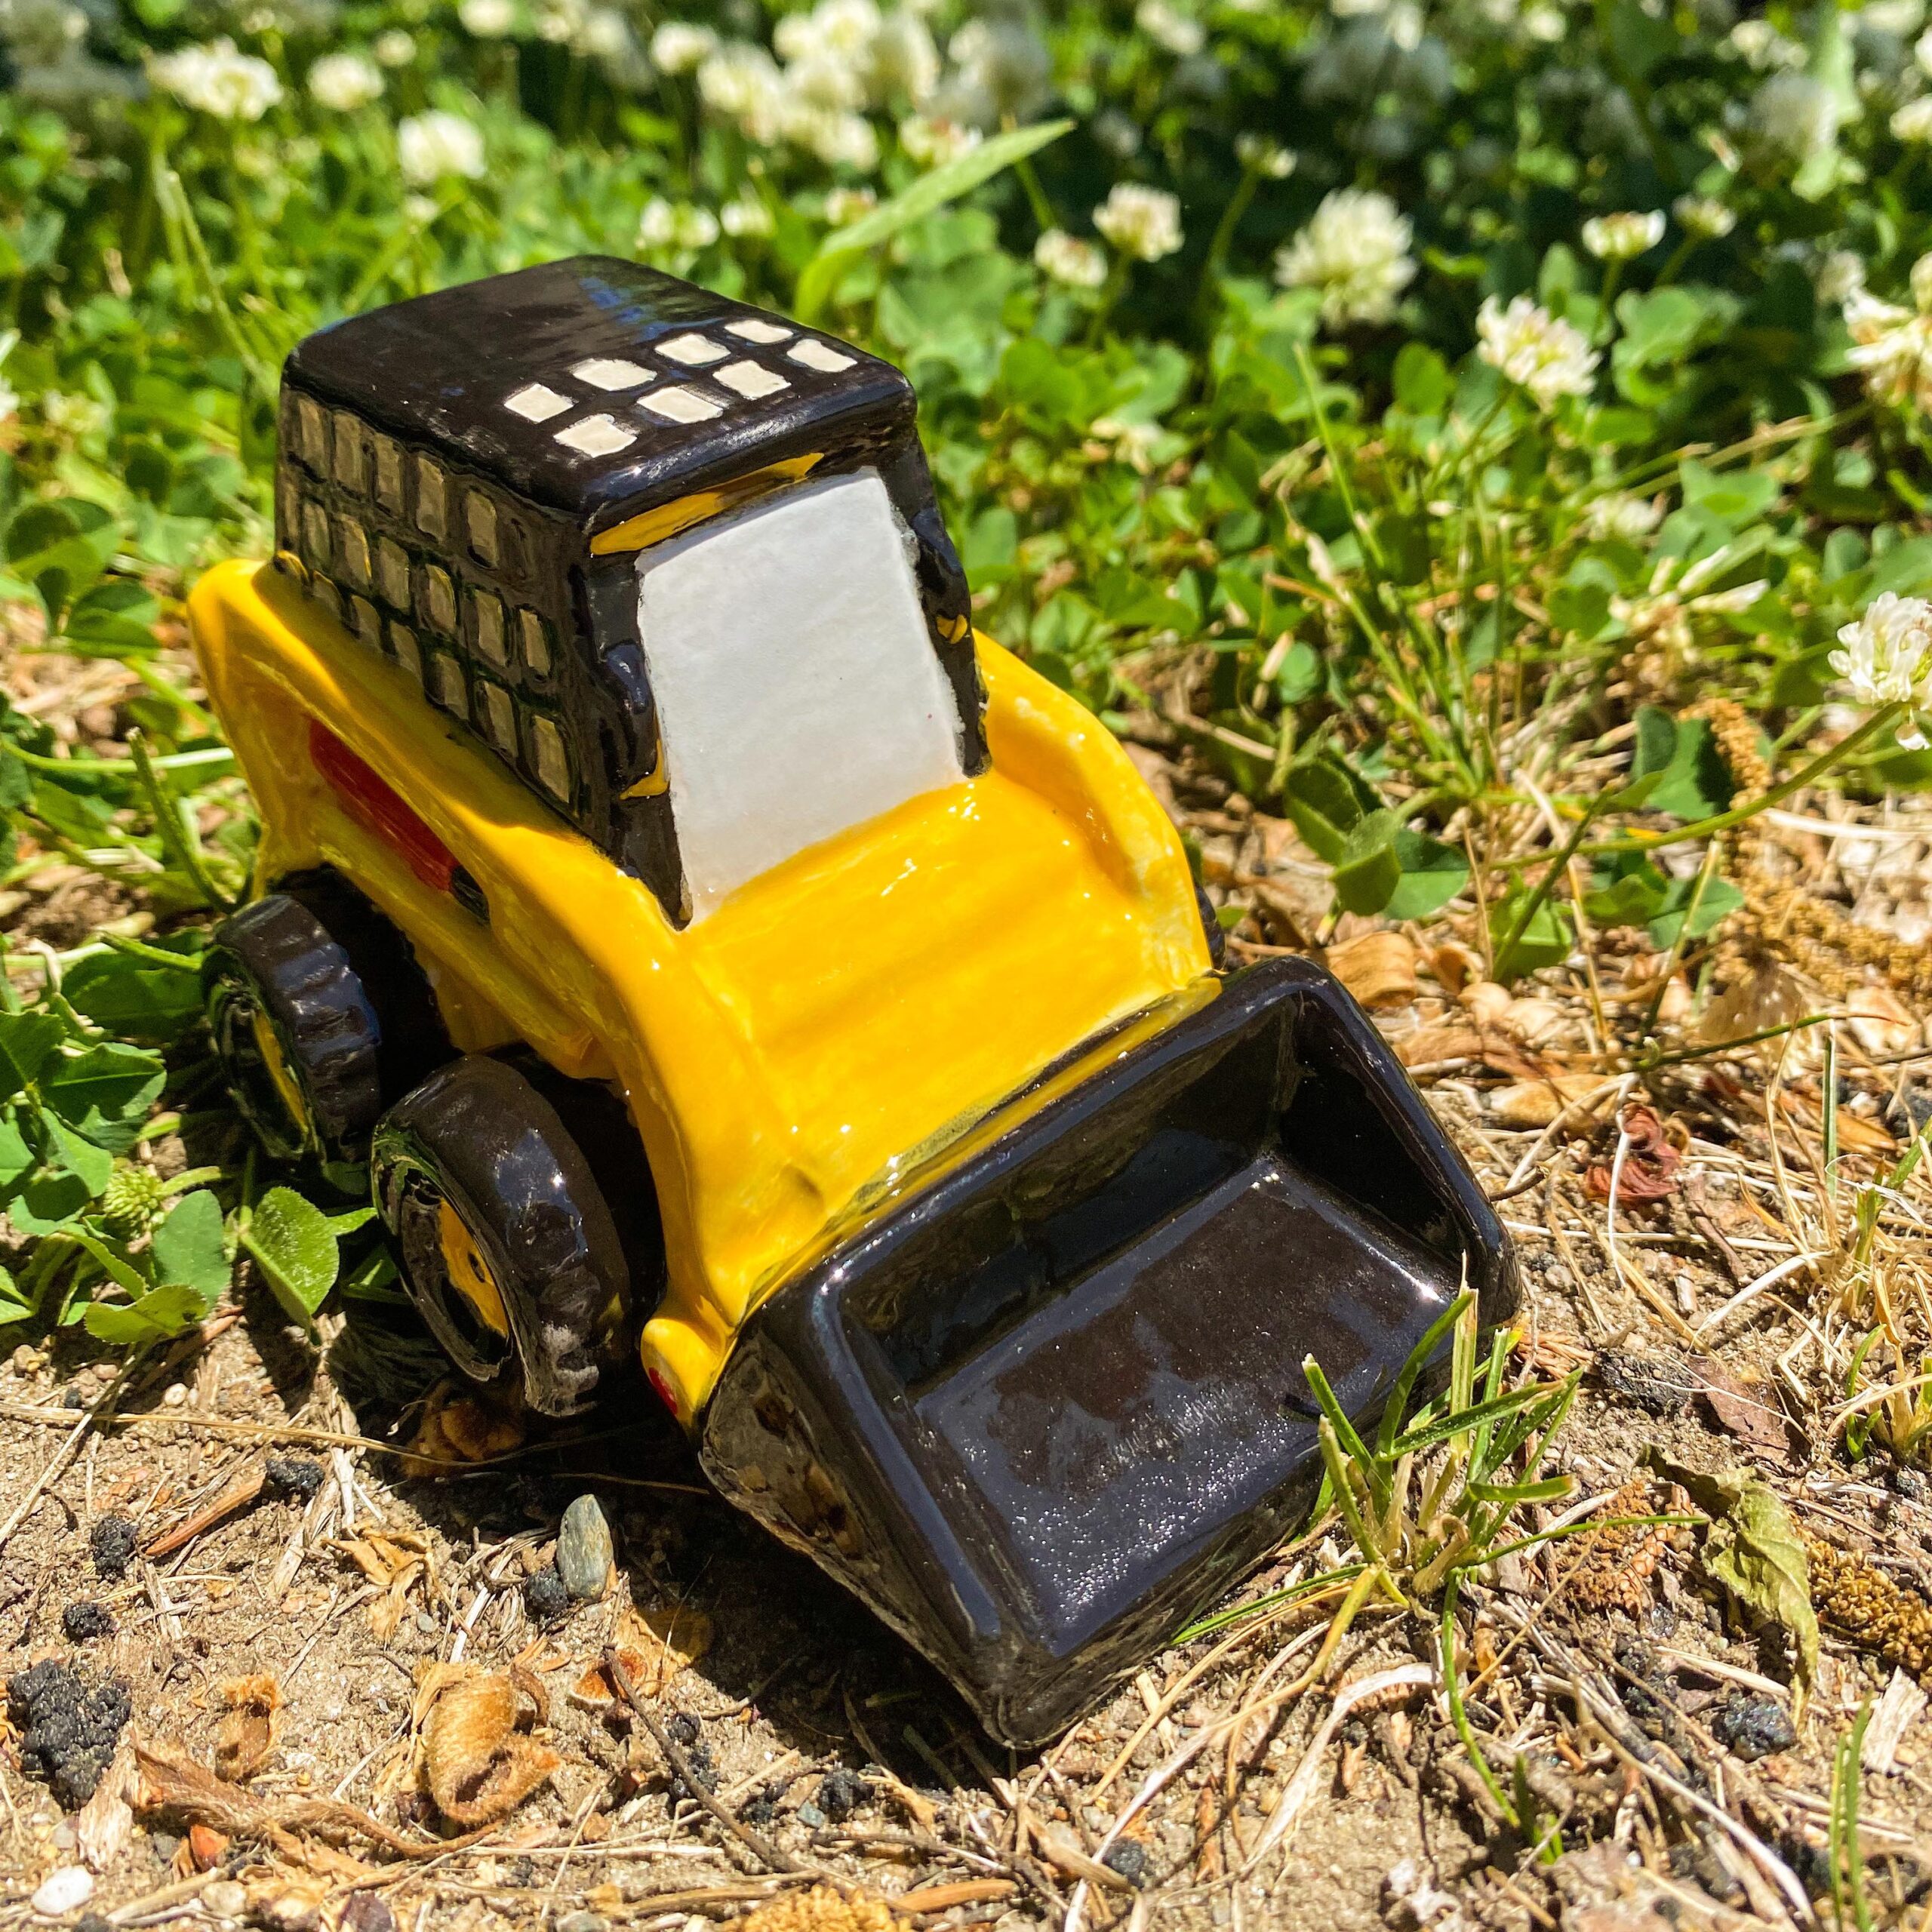 A toy tractor is sitting in the grass.